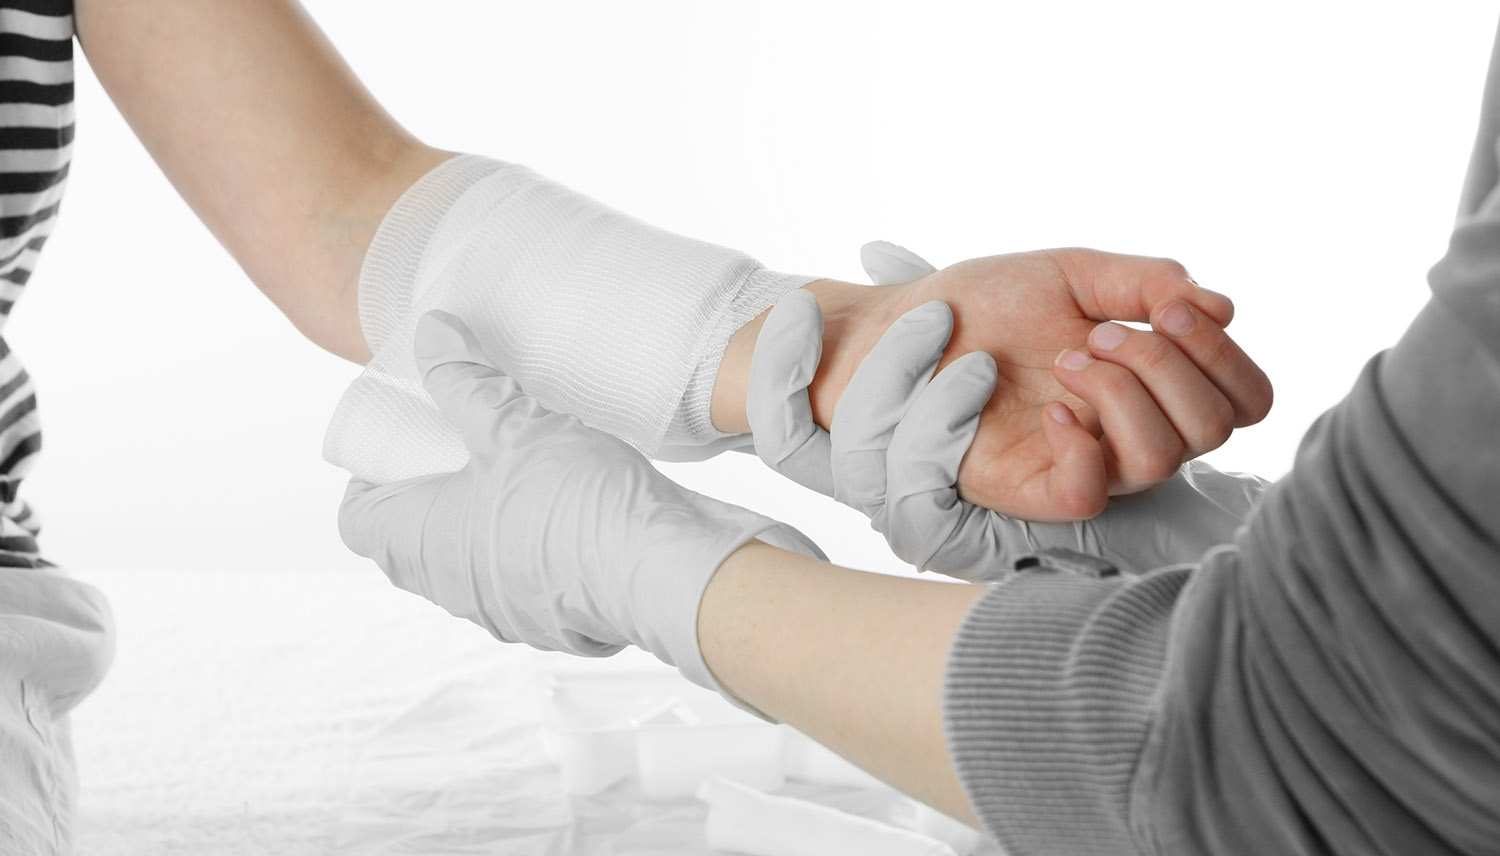 Frequently Asked Questions About Wound Care